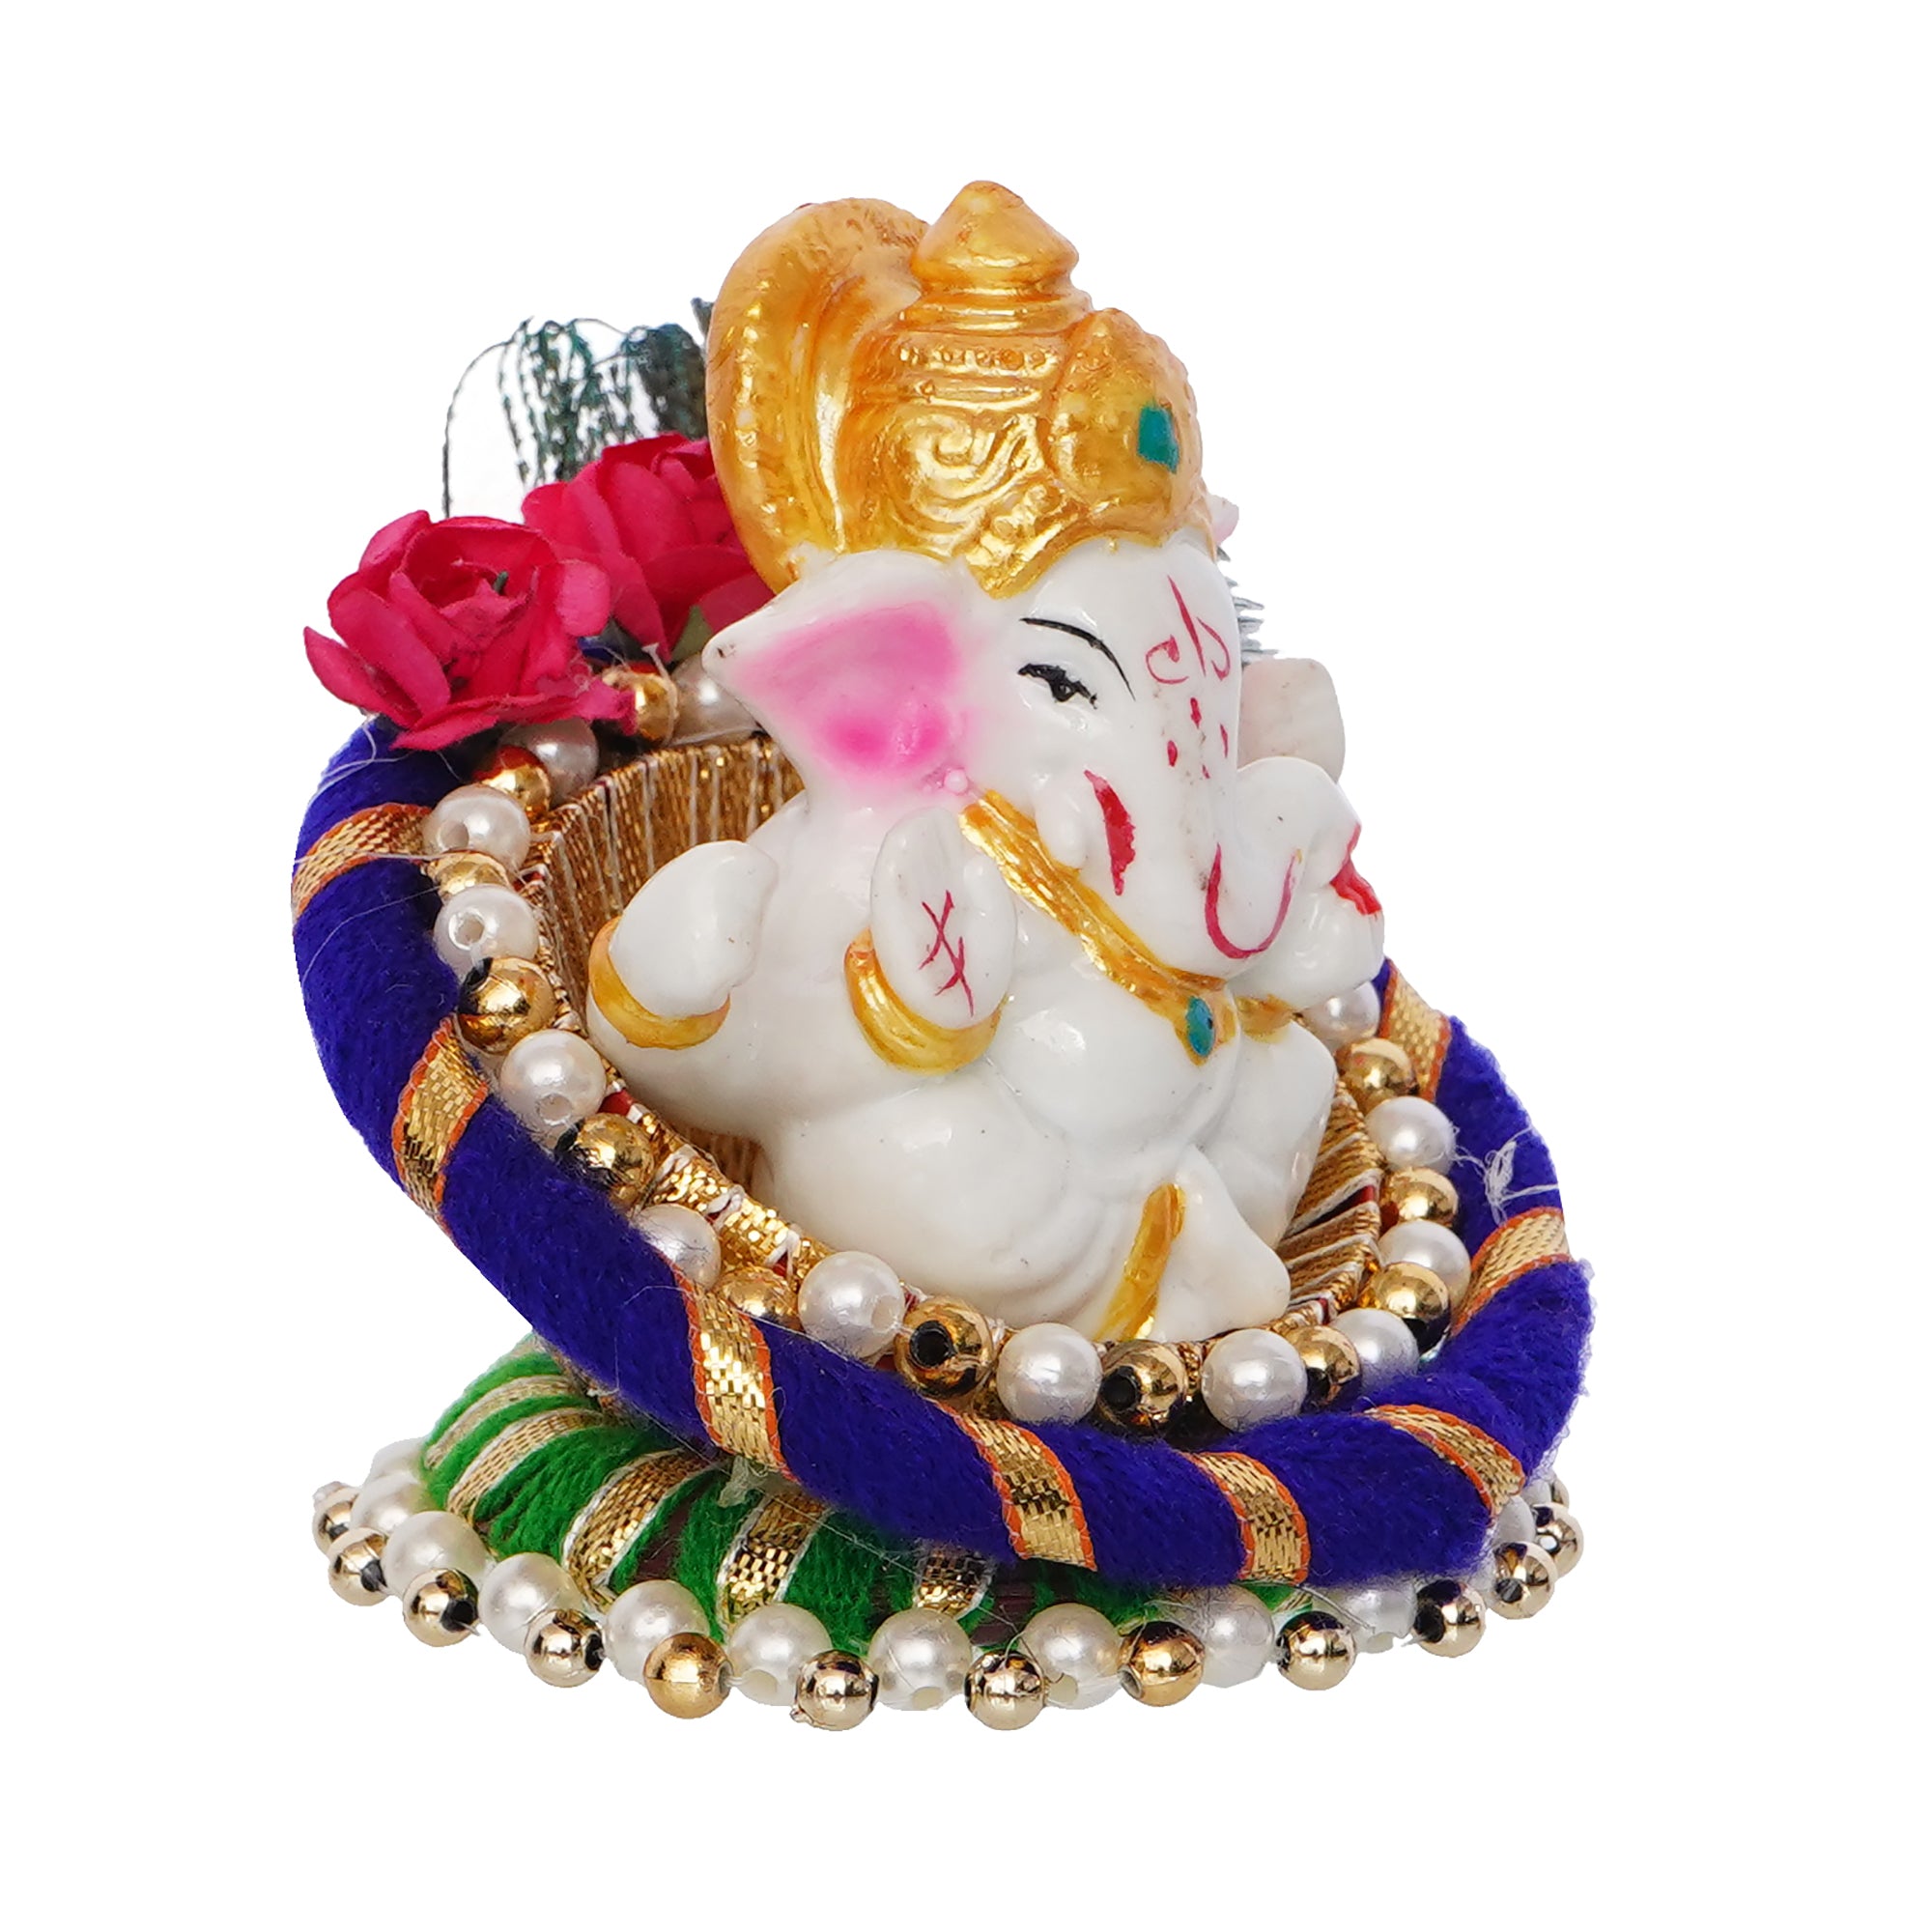 Polyresin Lord Ganesha Idol on Decorative Handcrafted Floral Plate for Home, Office and Car Dashboard 5